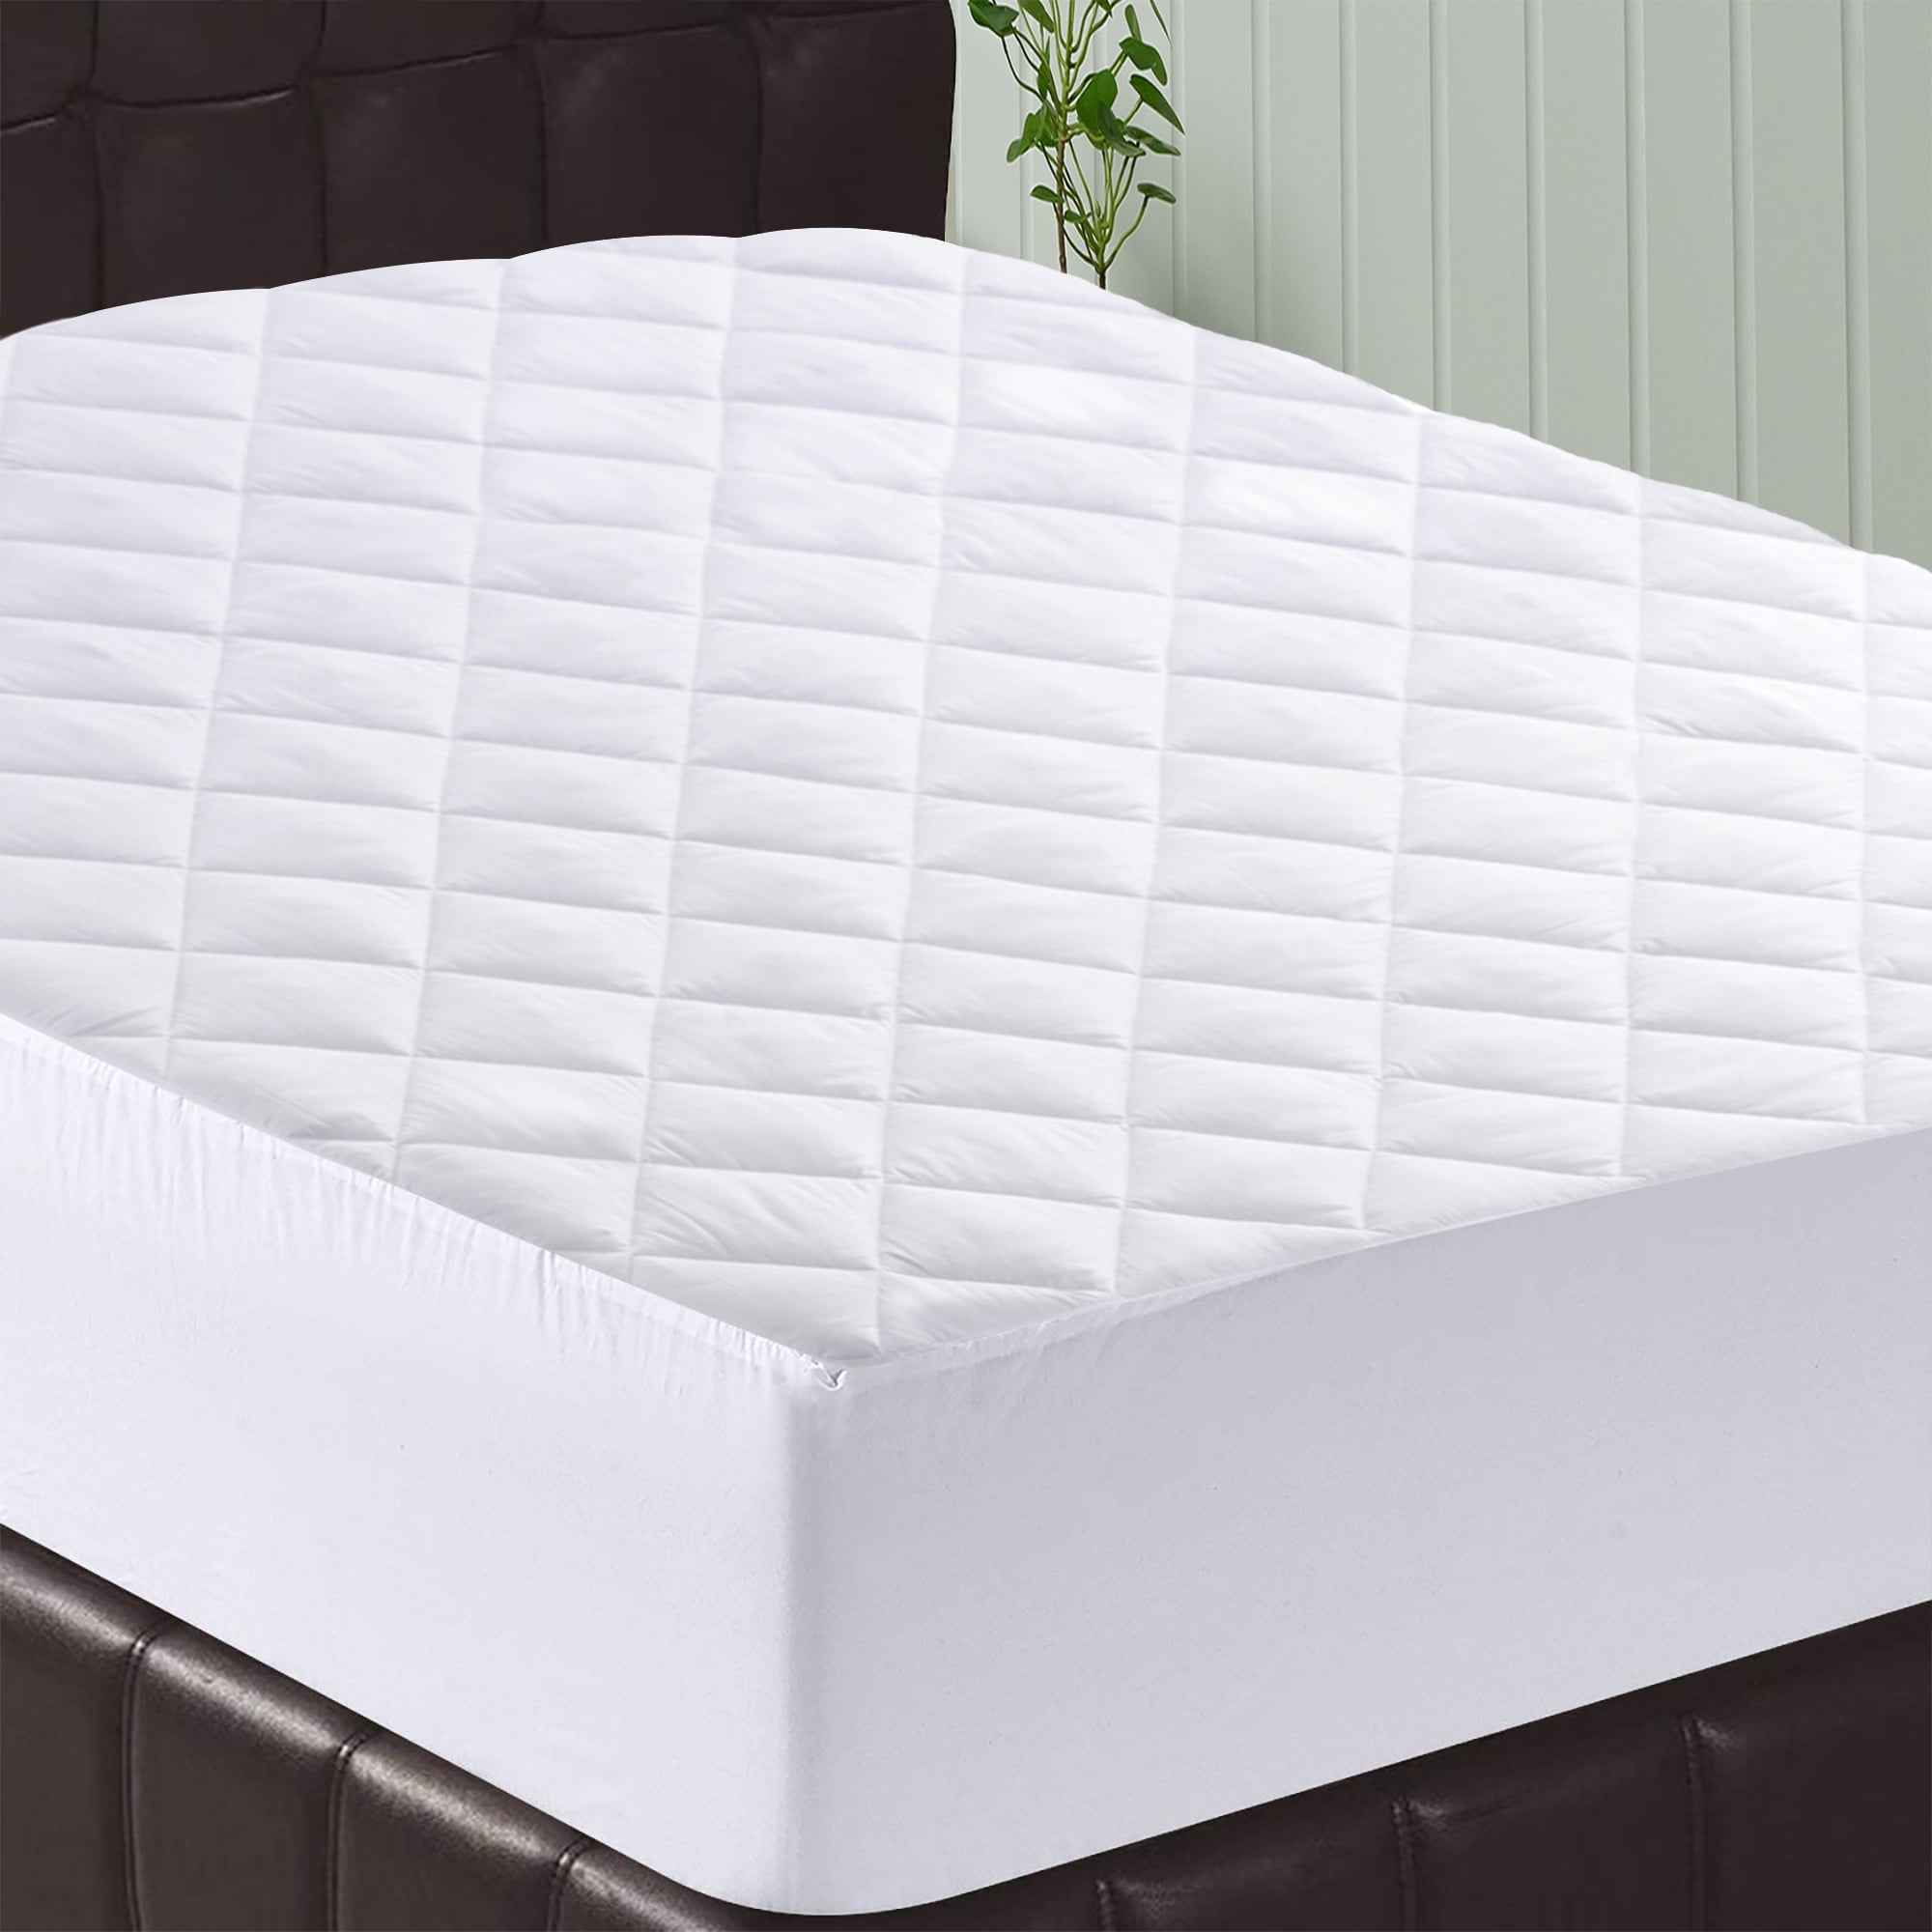 mDesign Twin XL Size Hypoallergenic Quilted Mattress Pad Cover Optic White 